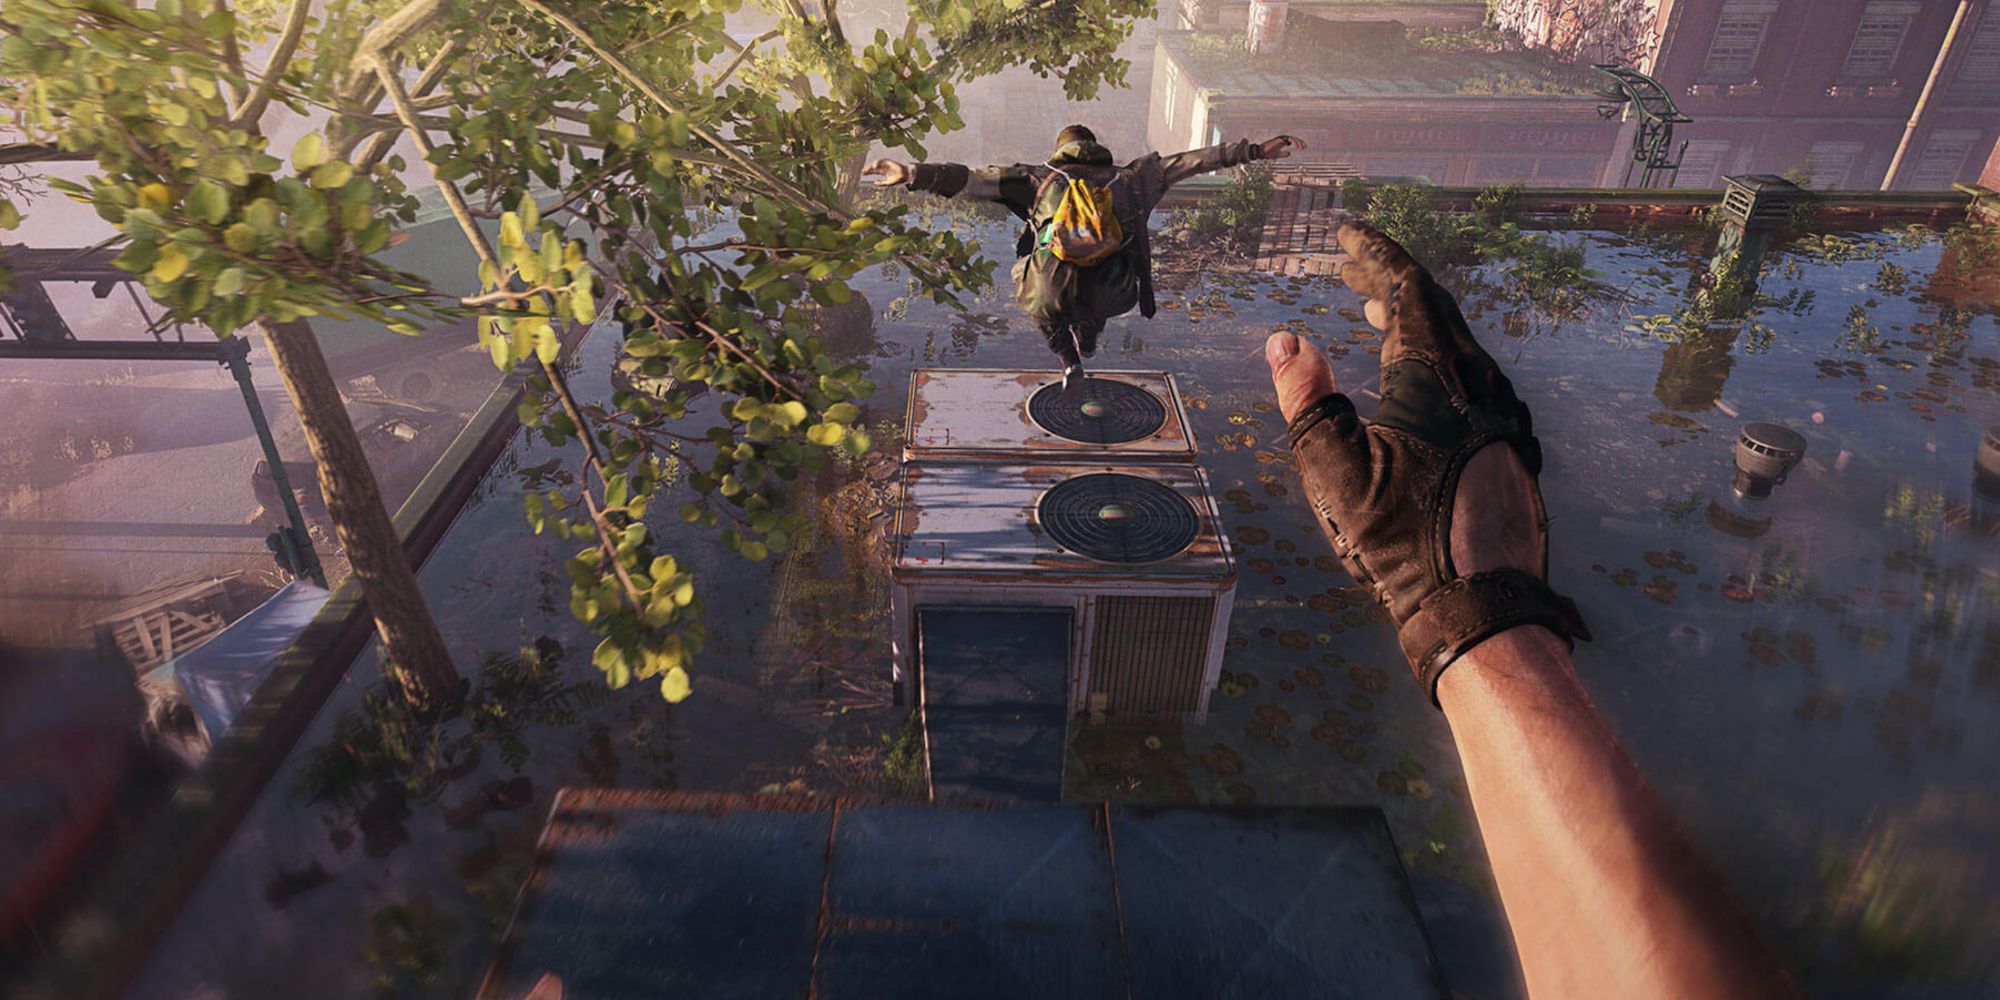 Players Jumping over a rooftop in Dying Light 2